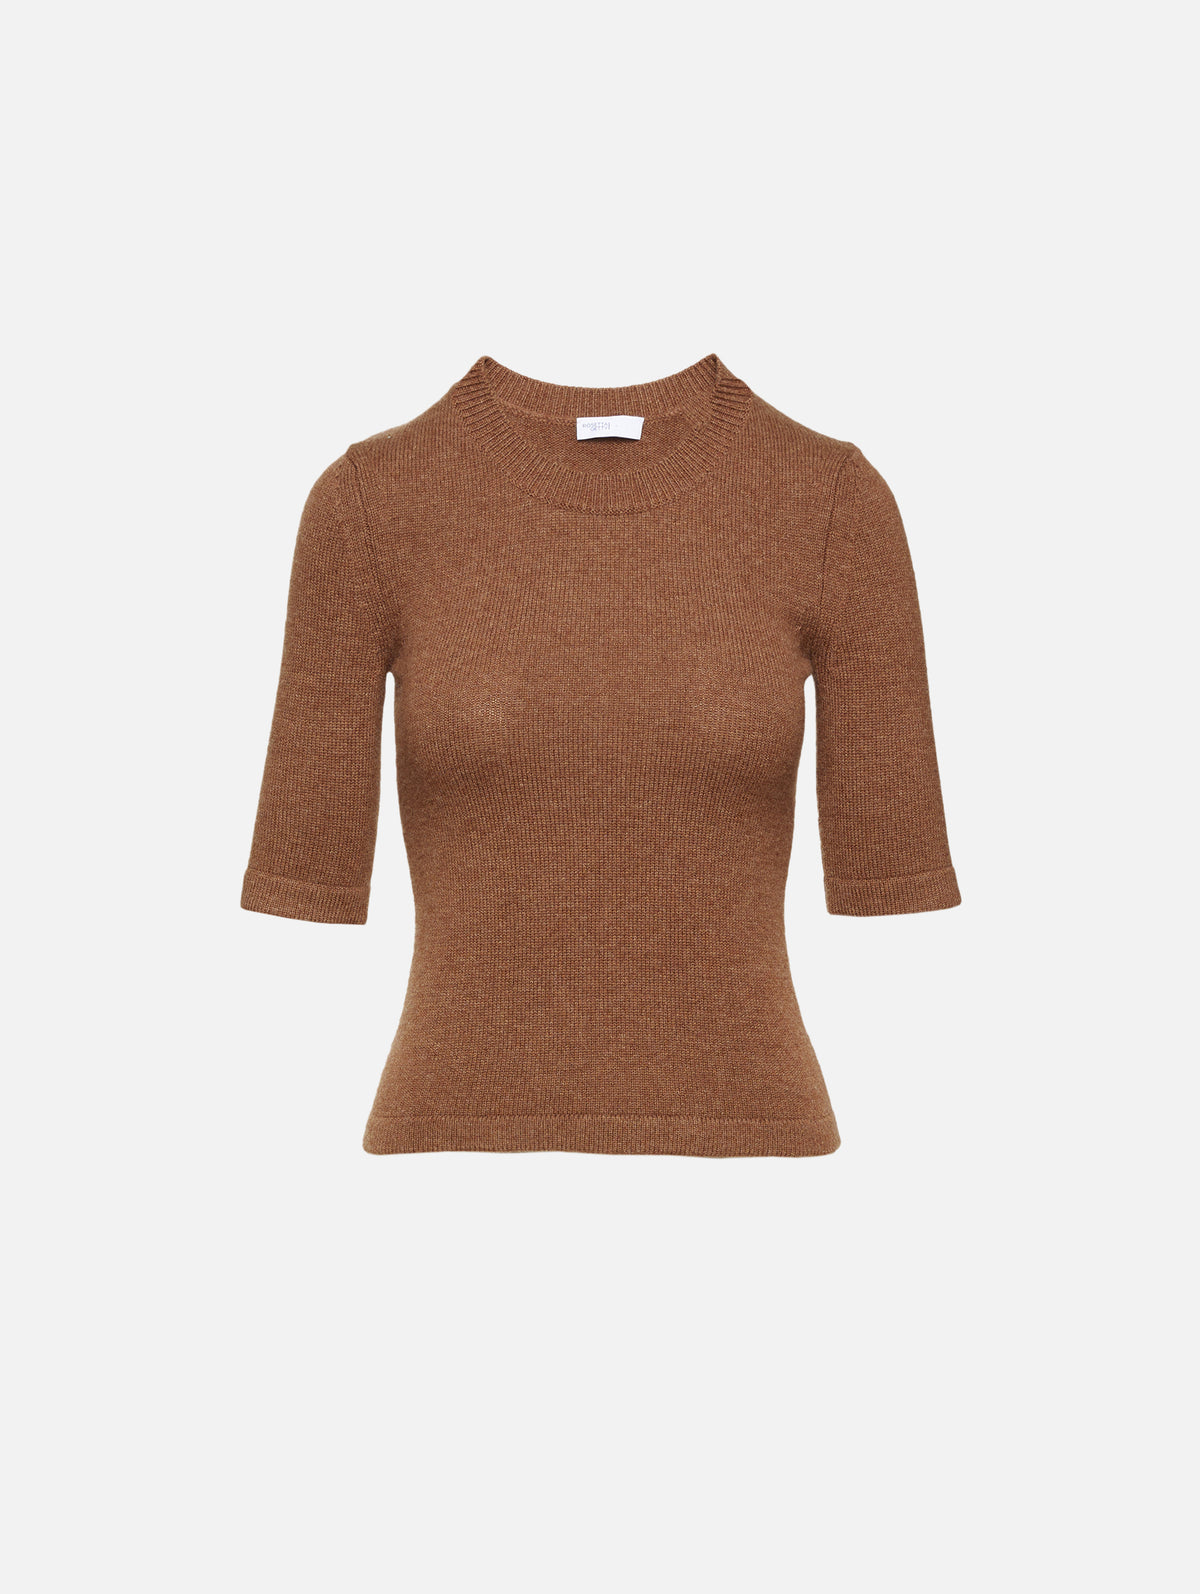 view 4 - Cropped Sleeve Sweater